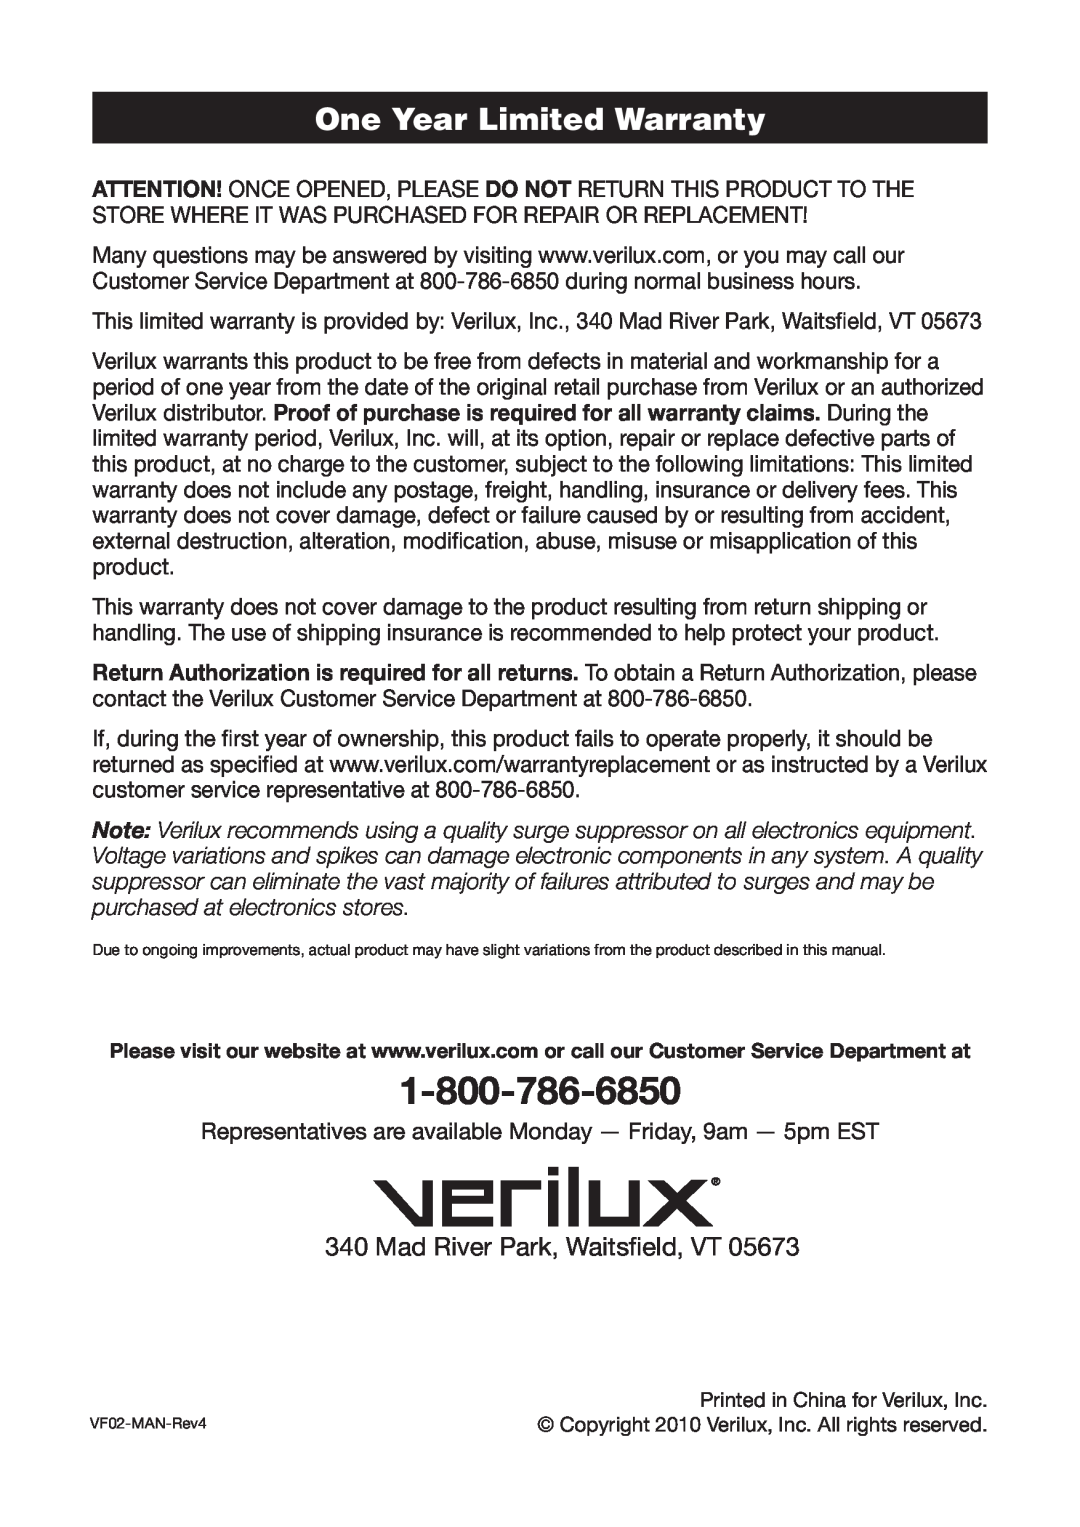 Verilux VF02 manual One Year Limited Warranty, Mad River Park, Waitsﬁeld, VT 